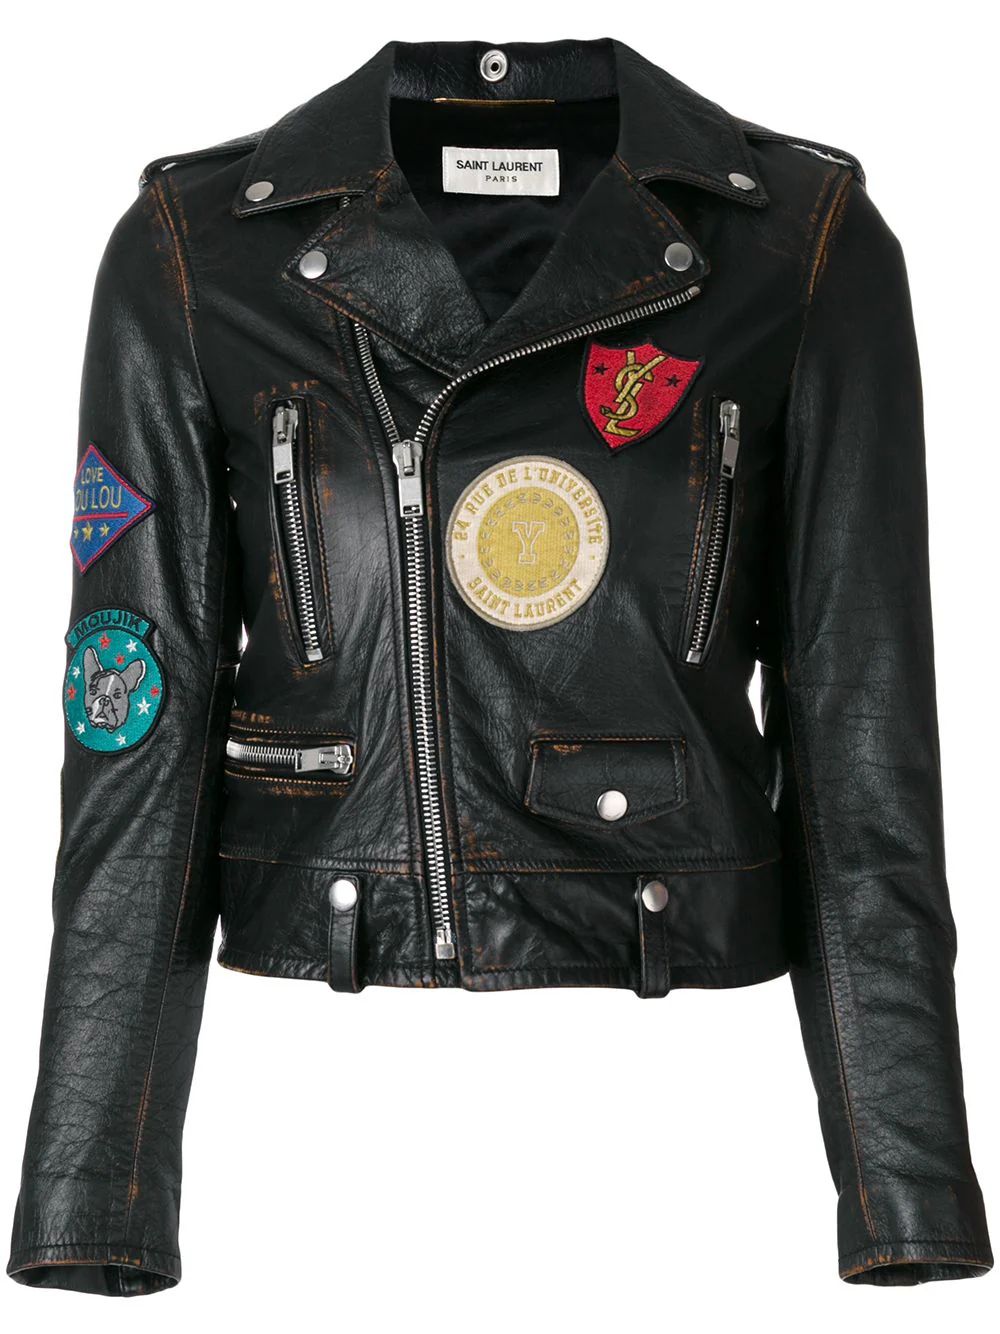 Saint Laurent patch embroidered leather jacket - Black | FarFetch Global